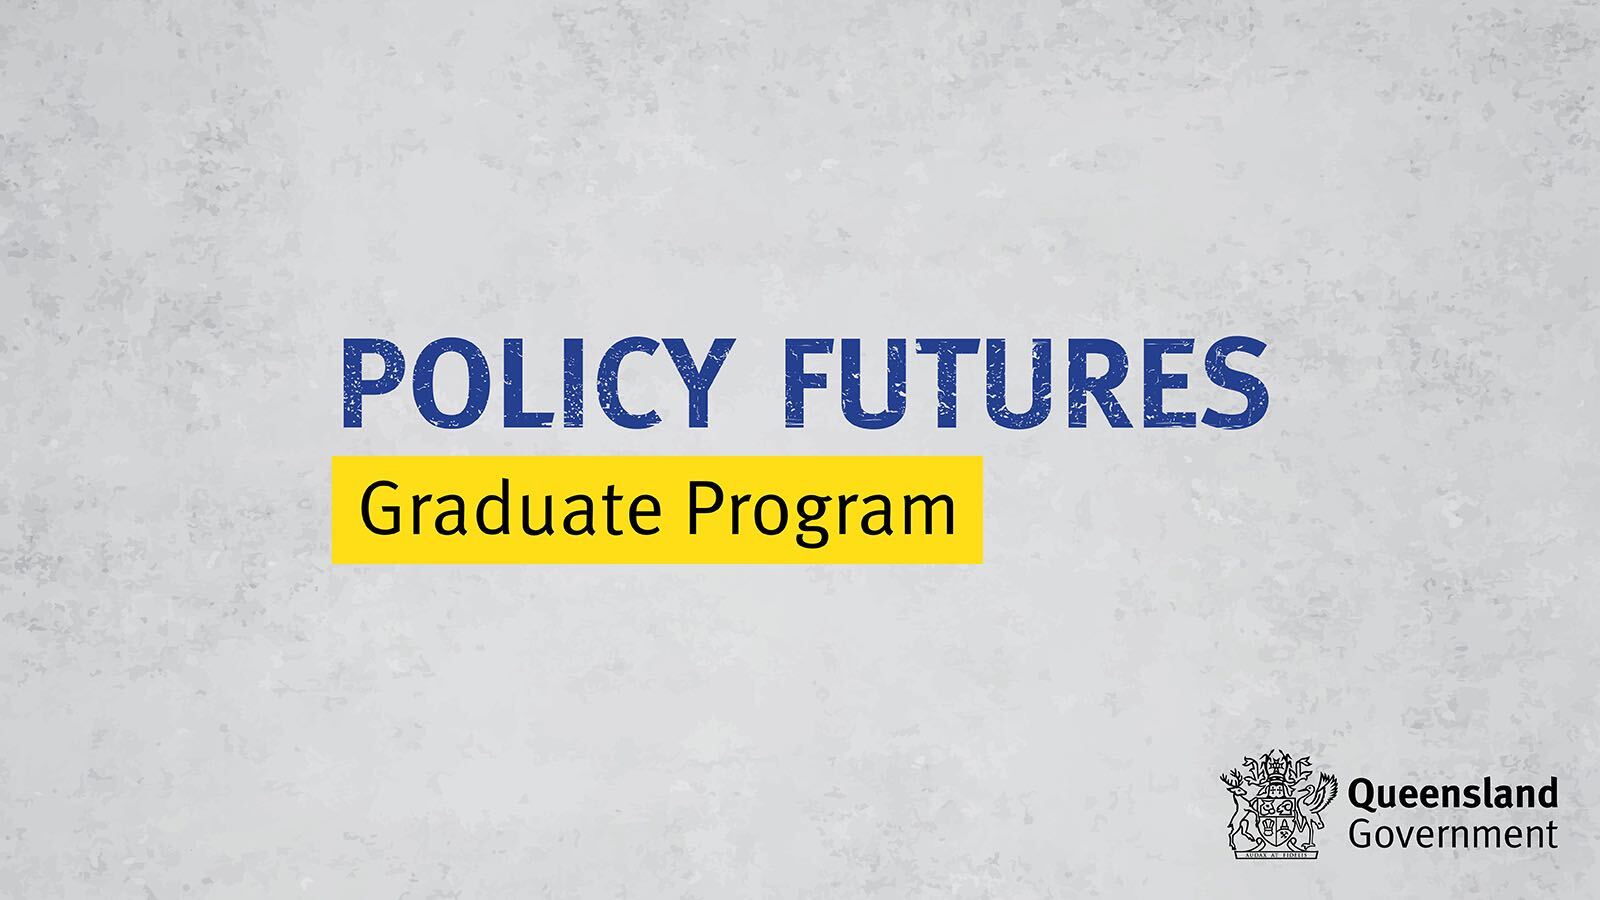 Policy Futures Graduate Program (Queensland Government) banner